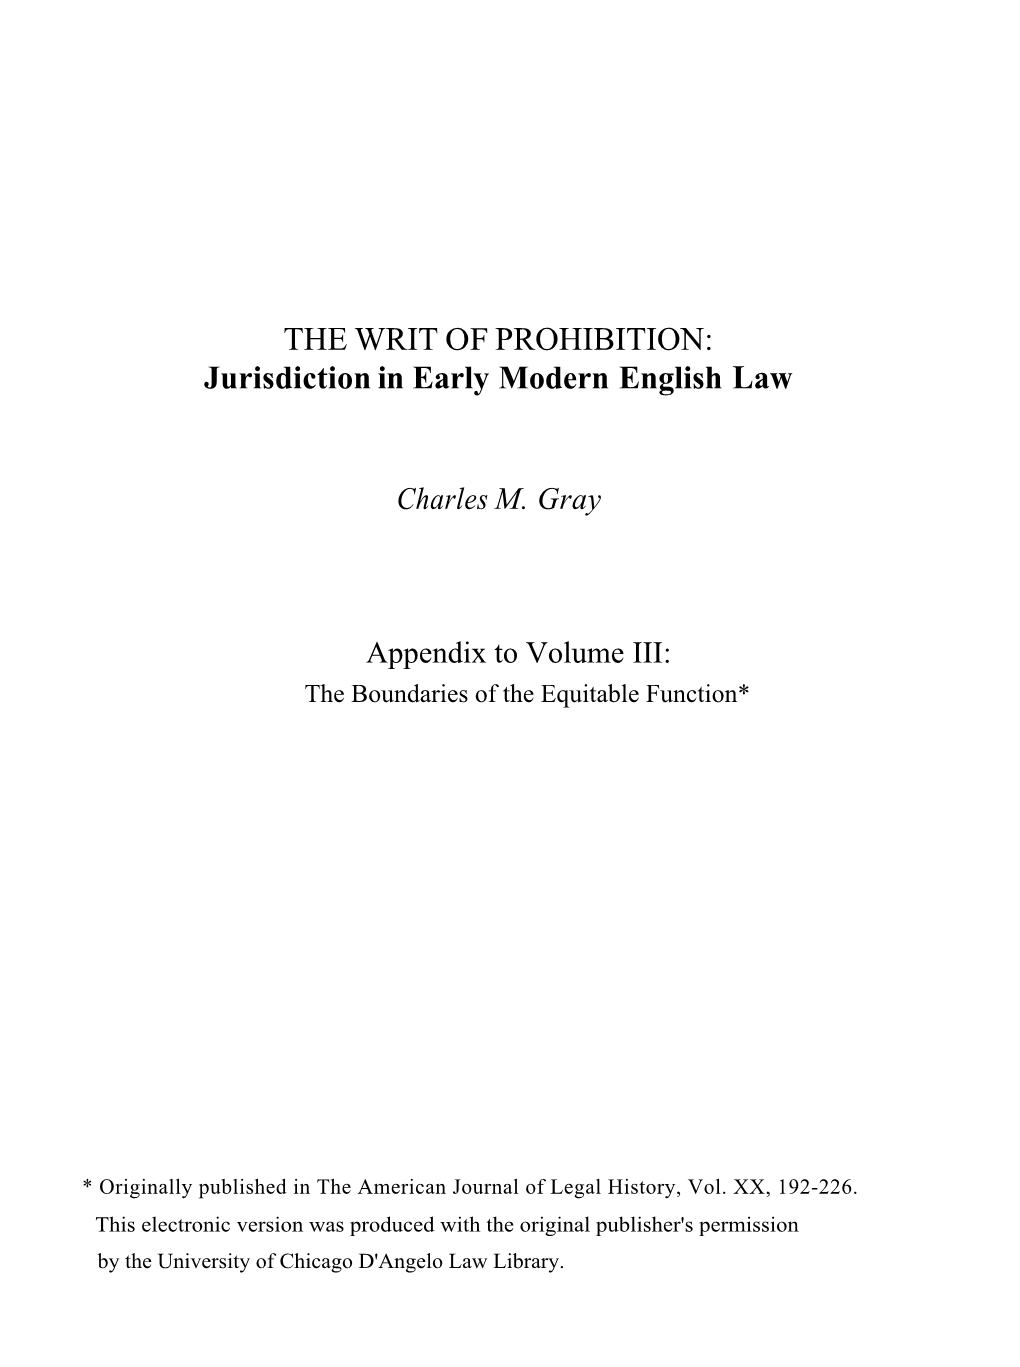 THE WRIT of PROHIBITION: Jurisdiction in Early Modern English Law